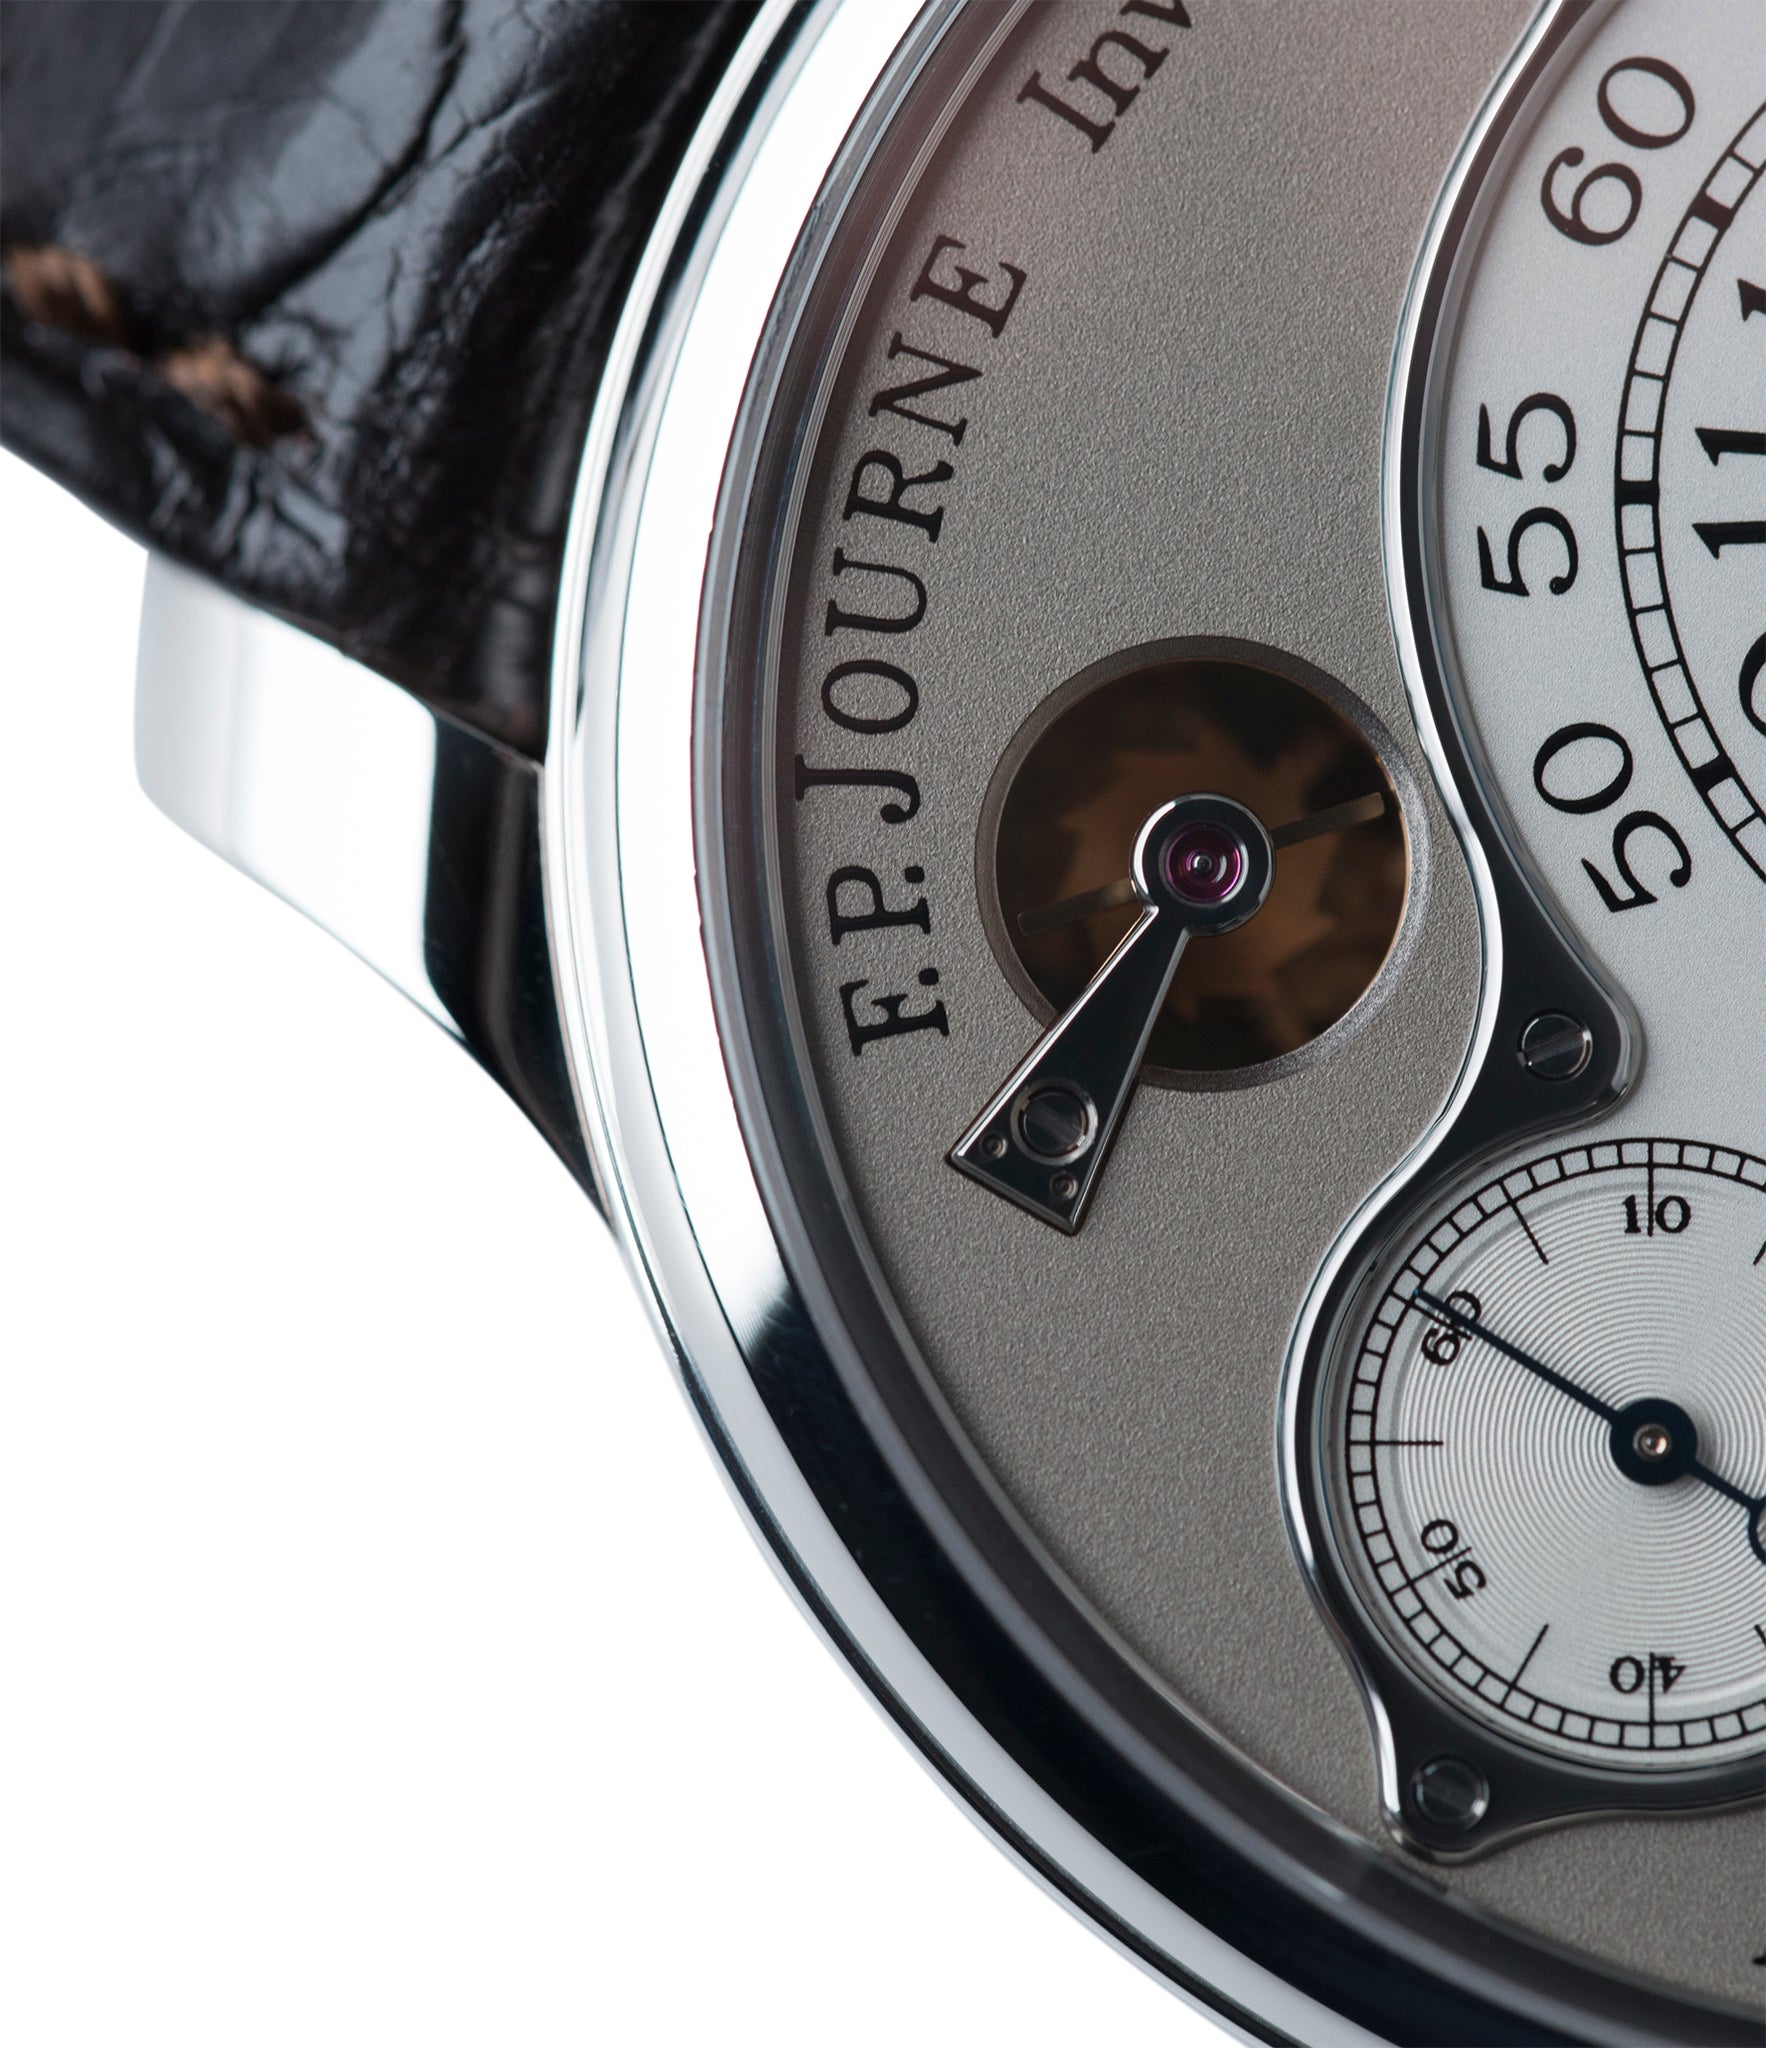 one-second rementoir d'egalité system F. P. Journe Chronometre Optimum platinum rare watch for sale online at A Collected Man London approved retailer of independent watchmakers